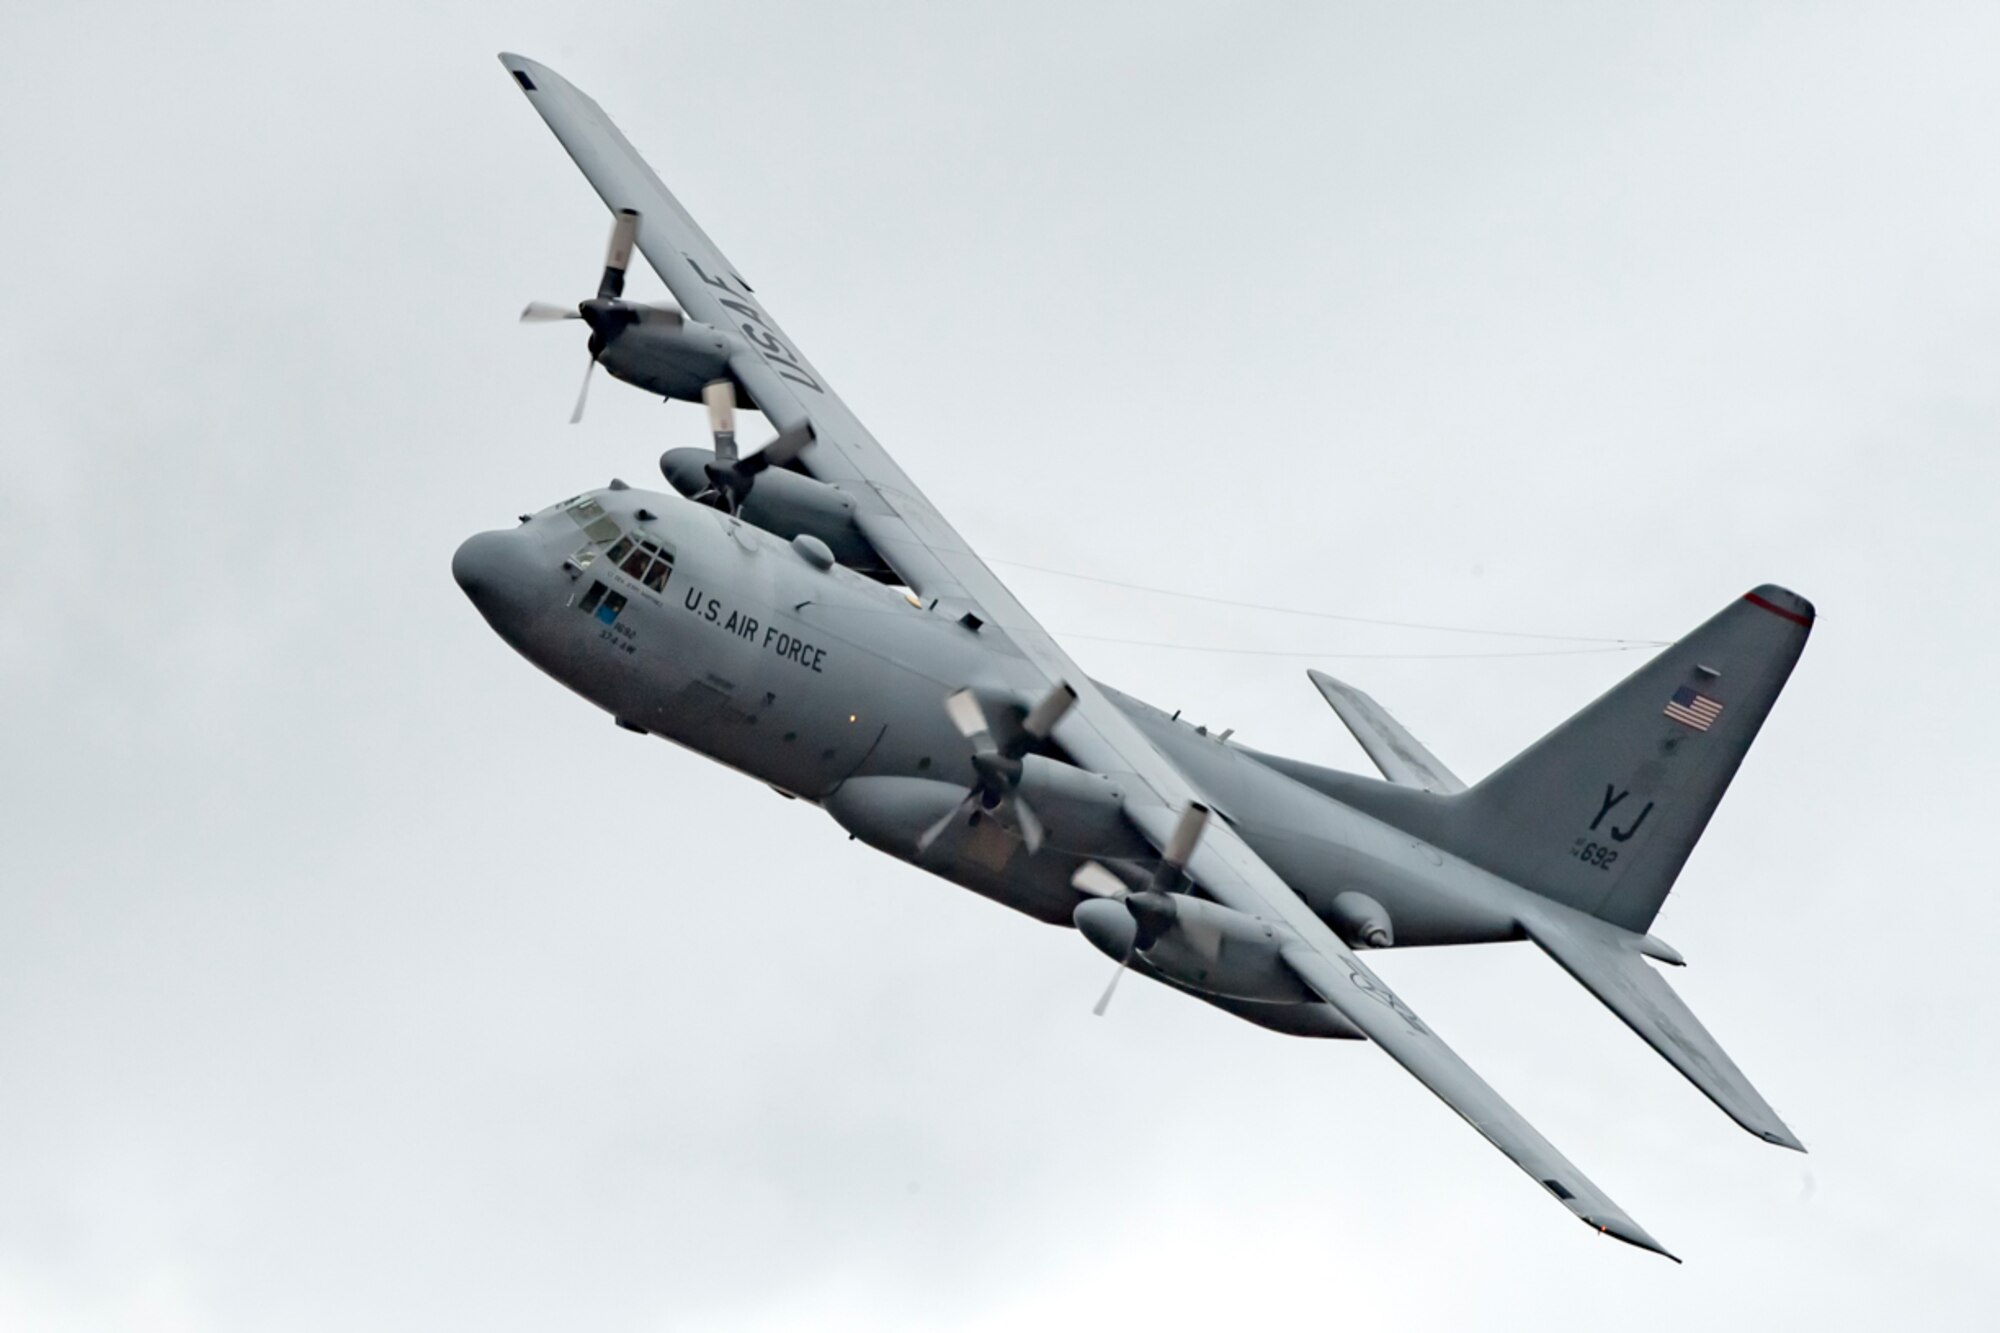 A C-130H Hercules assigned to the 36th Airlift Squadron flies over Combined Armed Training Center Camp Fuji, Japan, April 12, 2017, during a training mission. Airmen from the 374th Logistics Readiness Squadron and Eagle airlifts with the 36th AS conducted mass containerized delivery system airdrop training. (U.S. Air Force photo by Yasuo Osakabe)